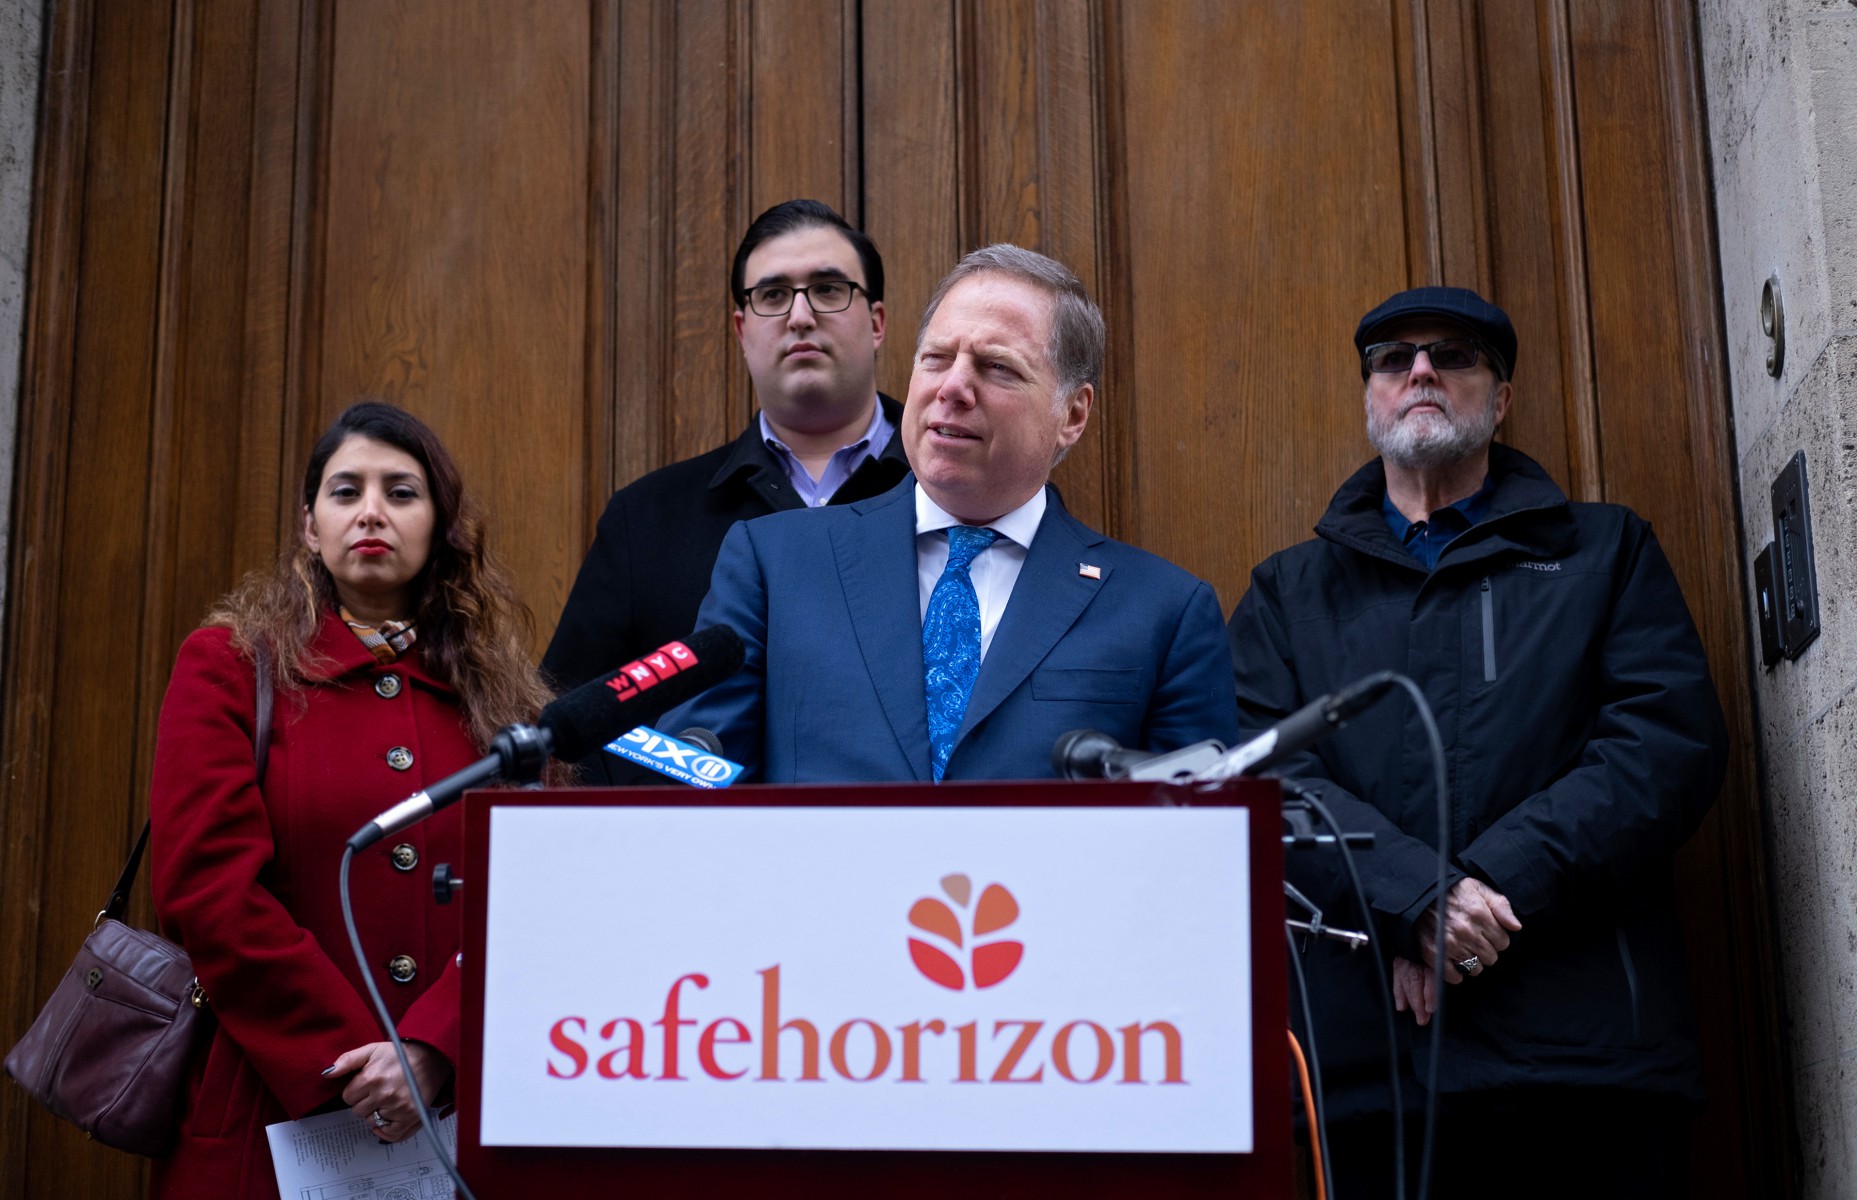 Geoffrey Berman, the US attorney for the Southern District of New York, revealed the princes lack of cooperation during a dramatic press conference outside Epsteins mansion